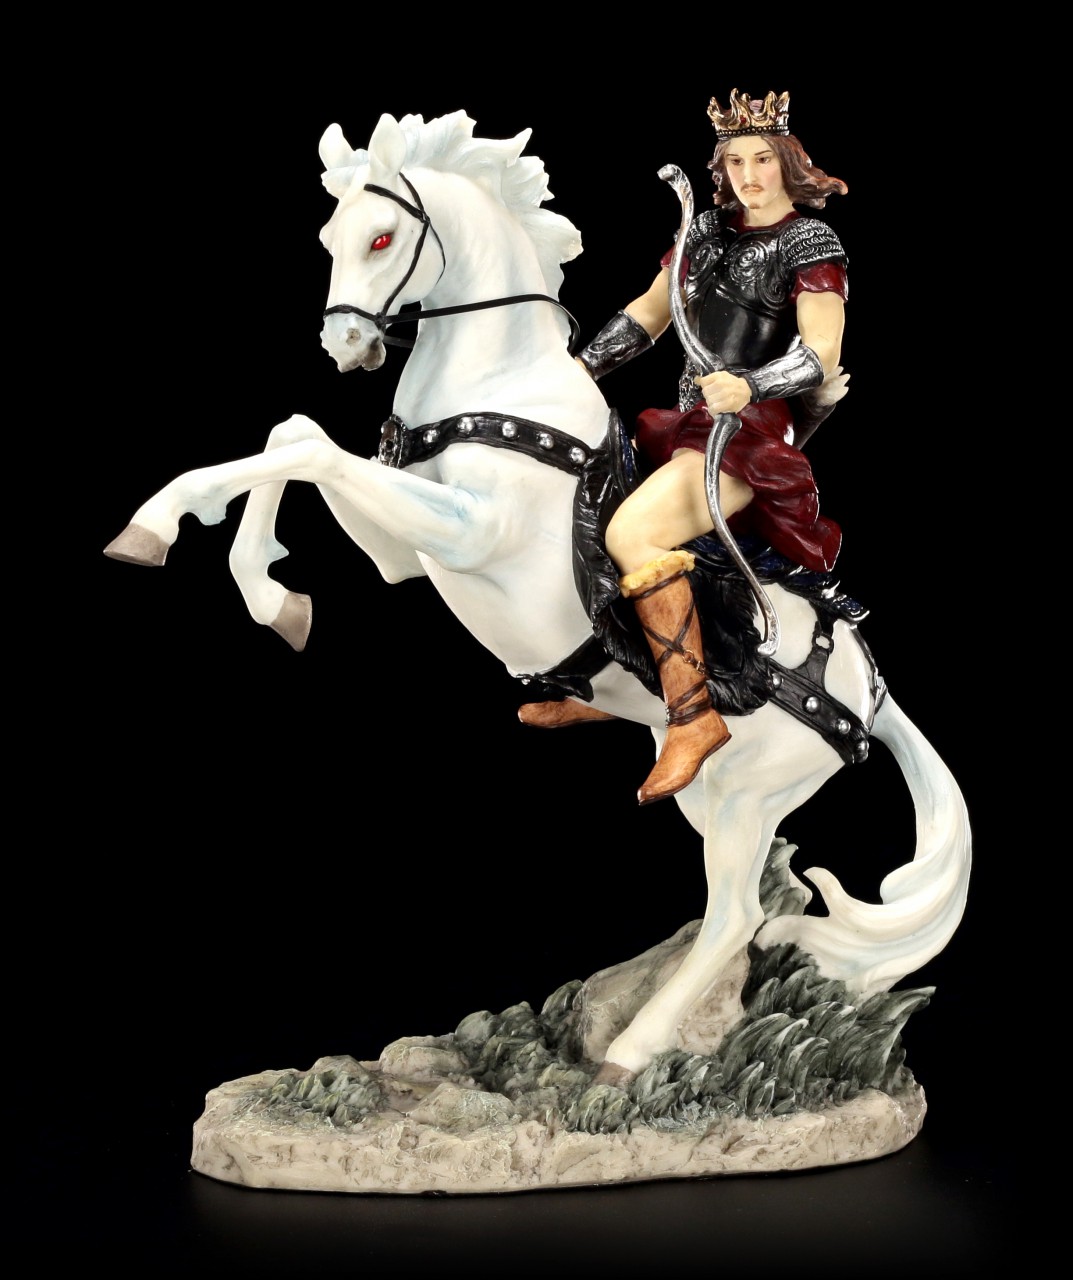 Apocalyptic Horseman Figurine - The Conquest